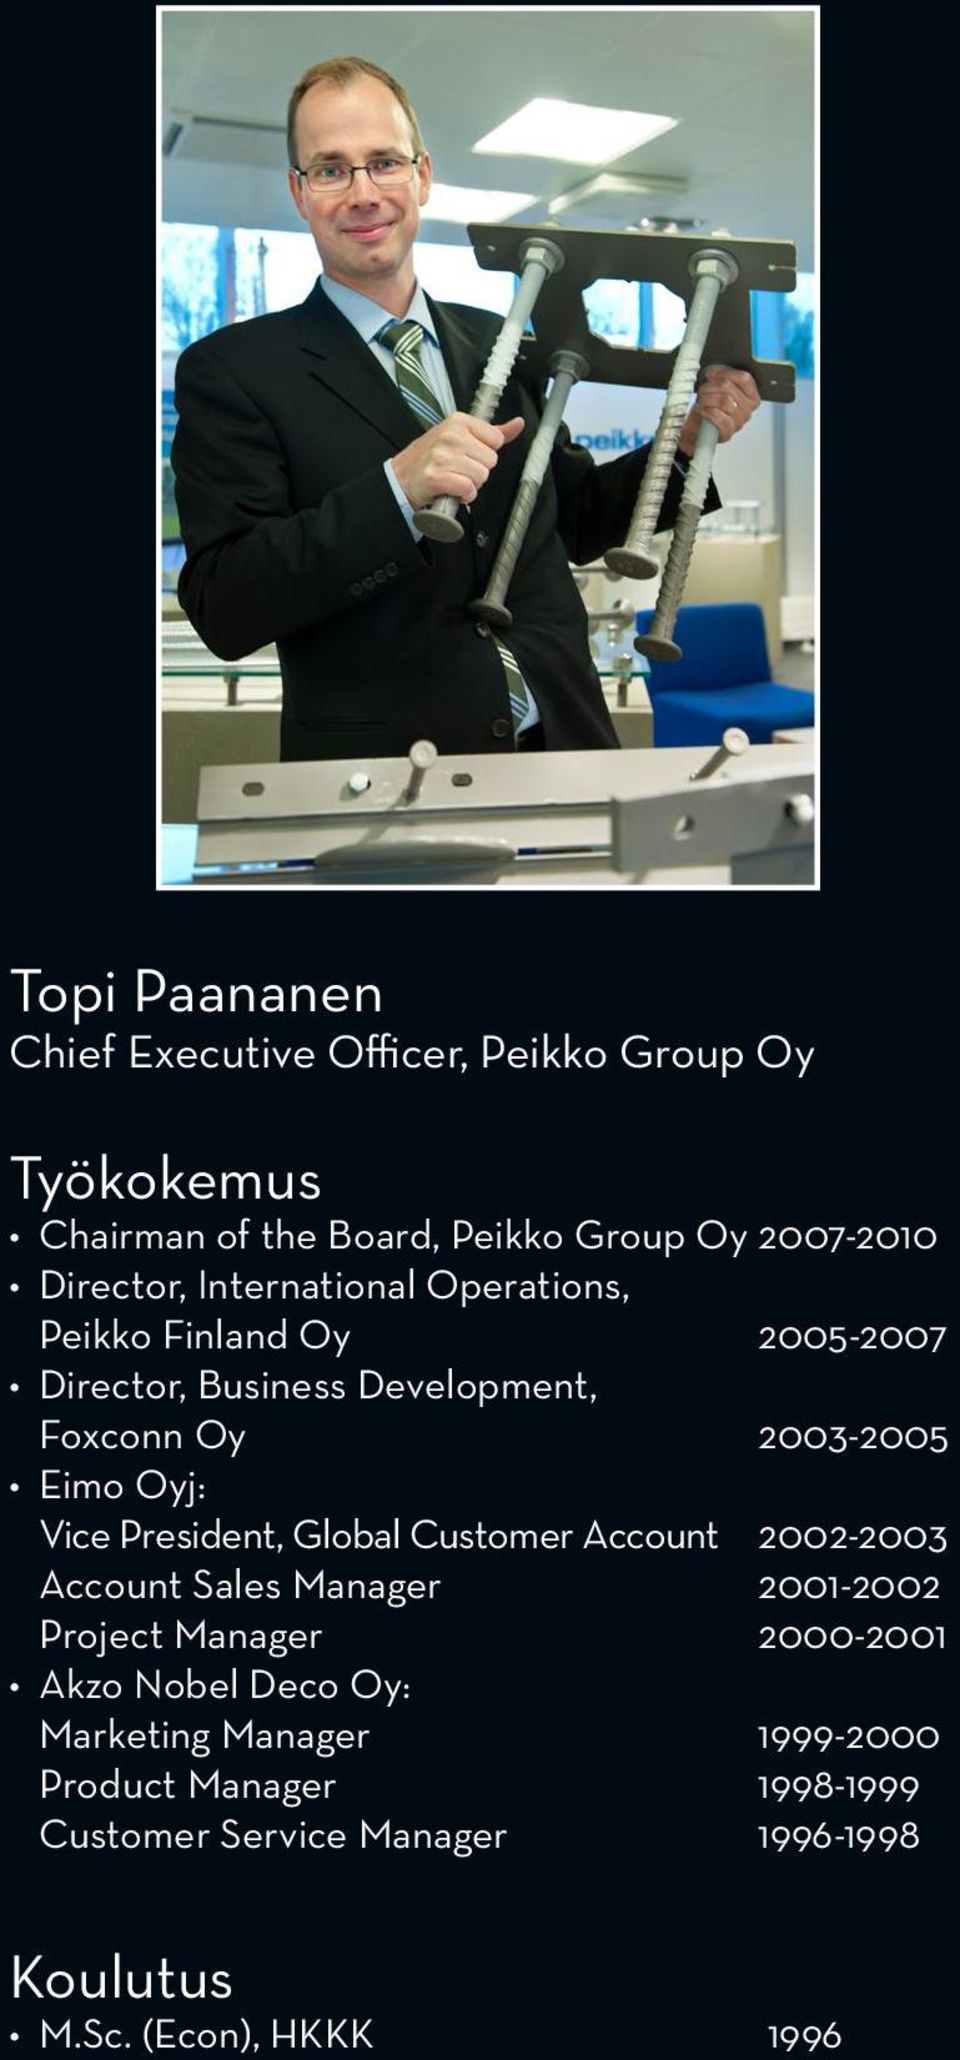 Oyj: Vice President, Global Customer Account 2002-2003 Account Sales Manager 2001-2002 Project Manager 2000-2001 Akzo